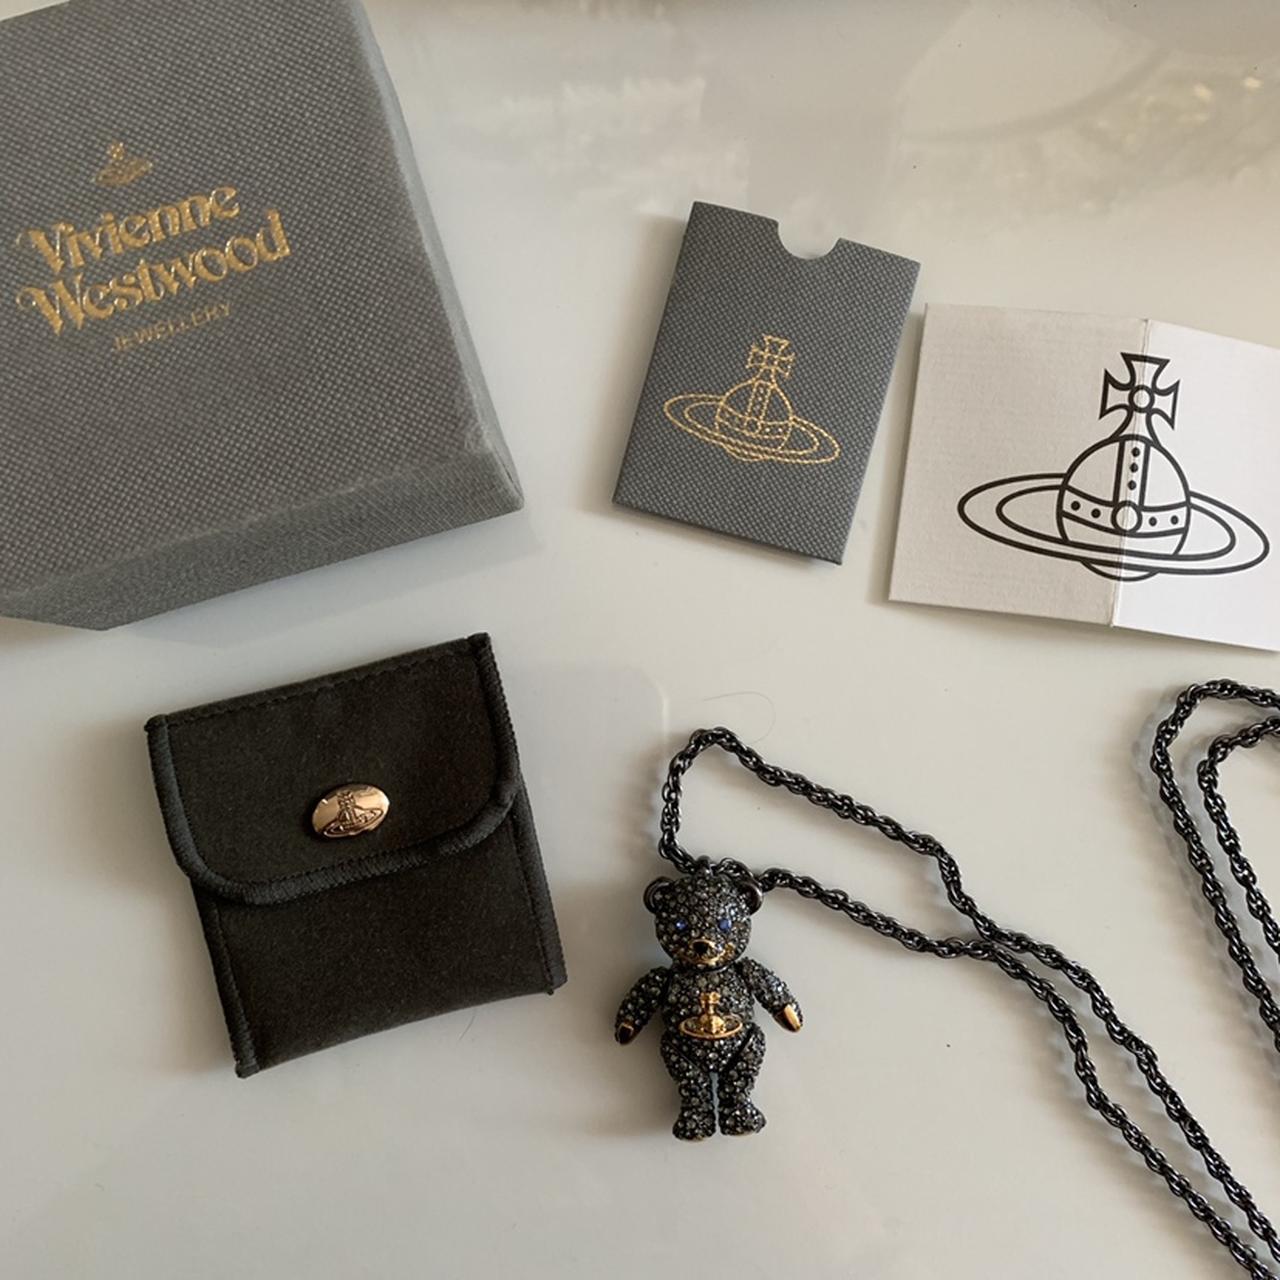 Coe & Co. - 🐻 VIVIENNE • WESTWOOD 🐻 Limited edition | Teddy pendant | 1  each available 🛒 Big - https://coeandcostores.com/vivienne-westwood-teddy- pendant.html 🛒 Small - https://coeandcostores.com/vivienne-westwood -little-pave-teddy-long-necklace ...